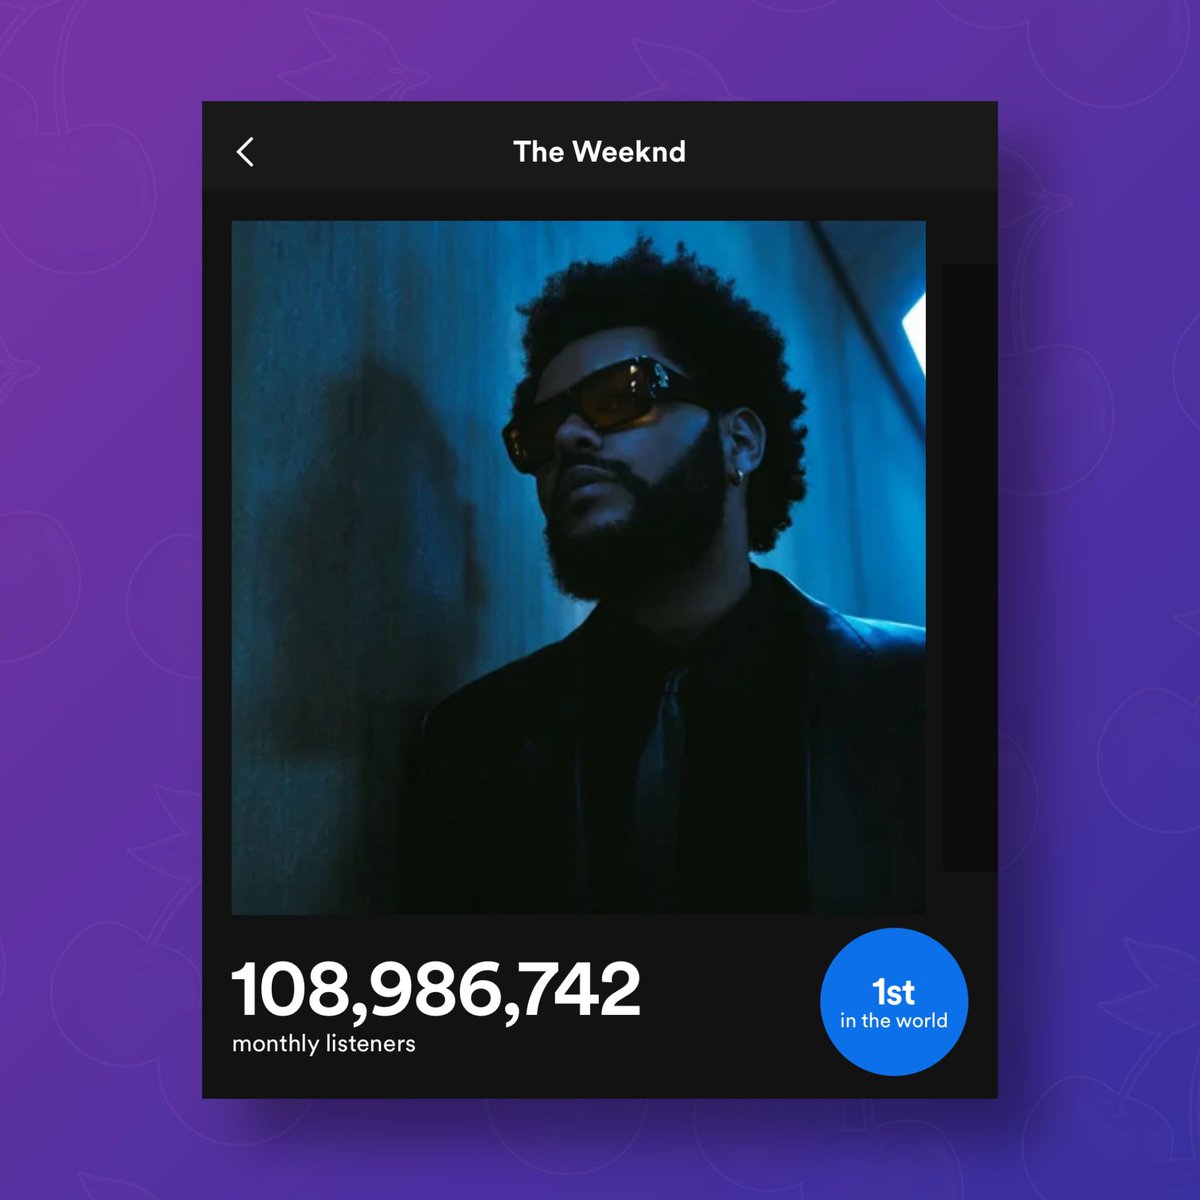 The Weeknd returns to #1 on Spotify’s monthly listeners with over 108.9 million.